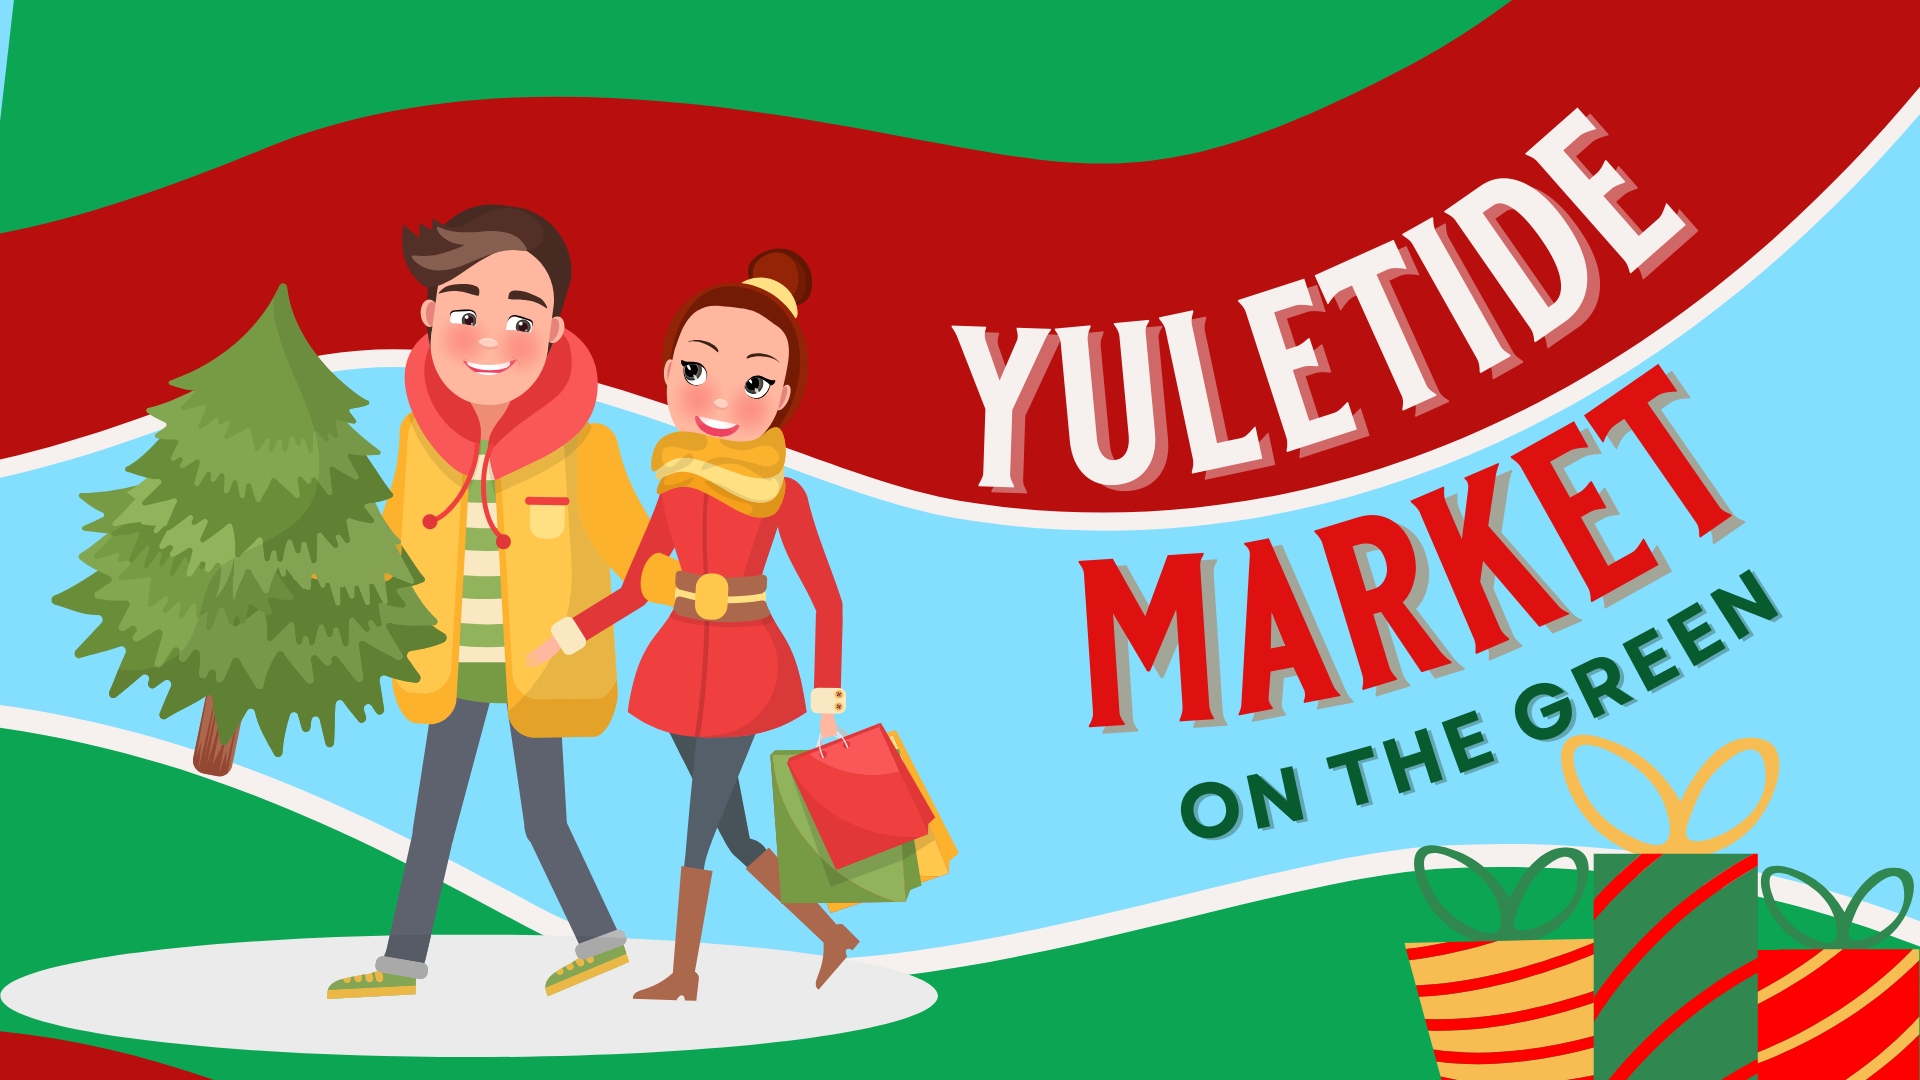 Yuletide Market on the Green cover image